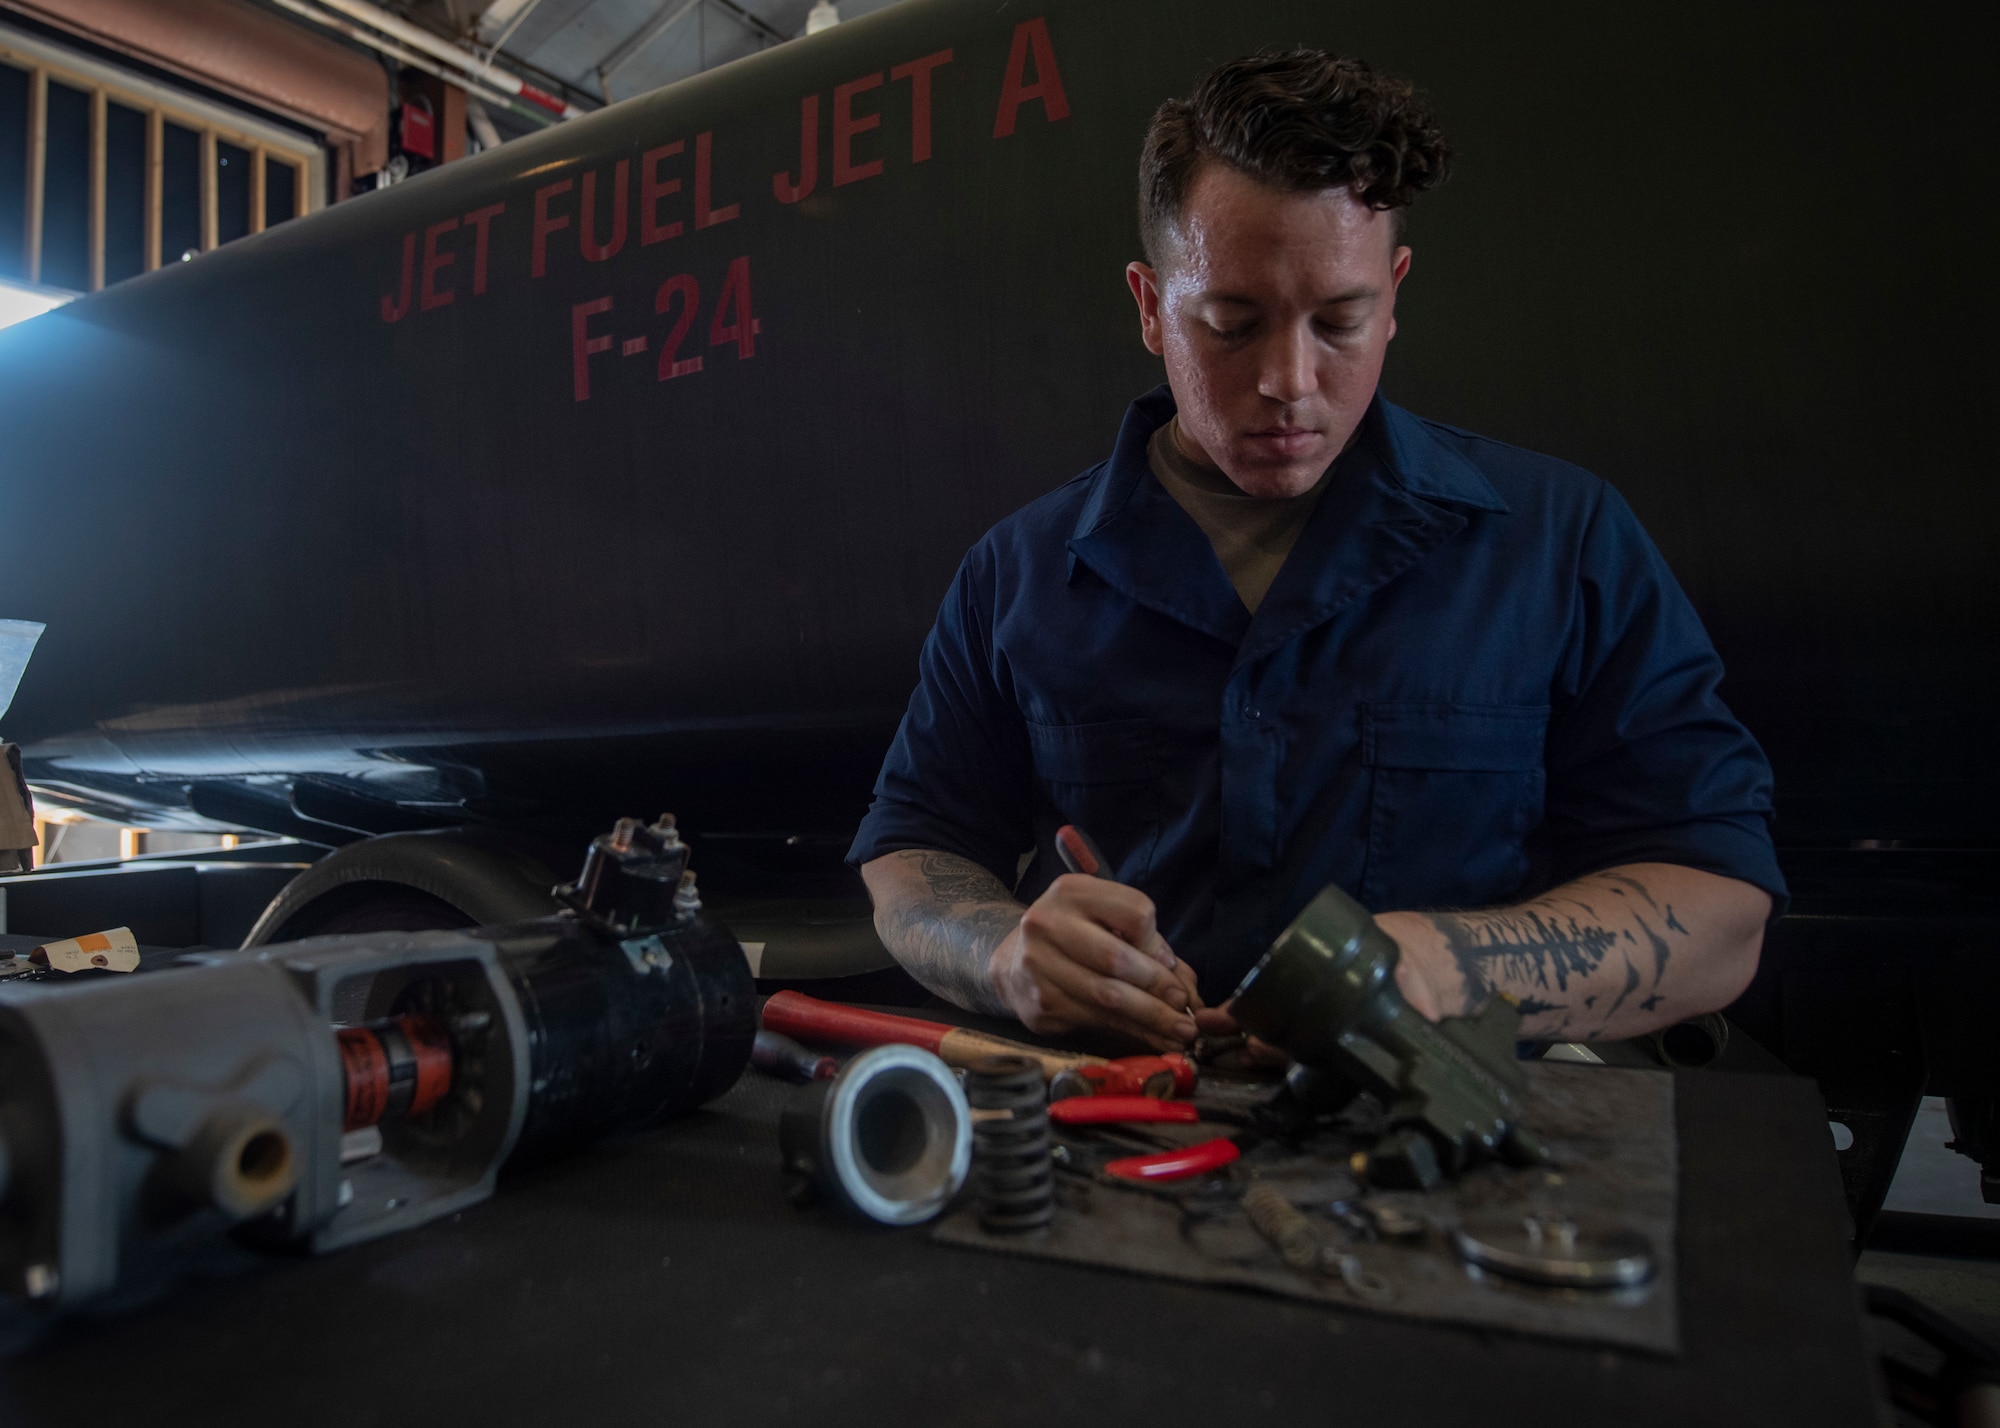 U.S. Air Force Staff Sgt. Jake Gonzalez, fire truck and refueling mechanic assigned temporarily assigned to the 325th Logistics Readiness Squadron, repairs a refueling truck component June 4, 2019, on Tyndall Air Force Base, Florida.